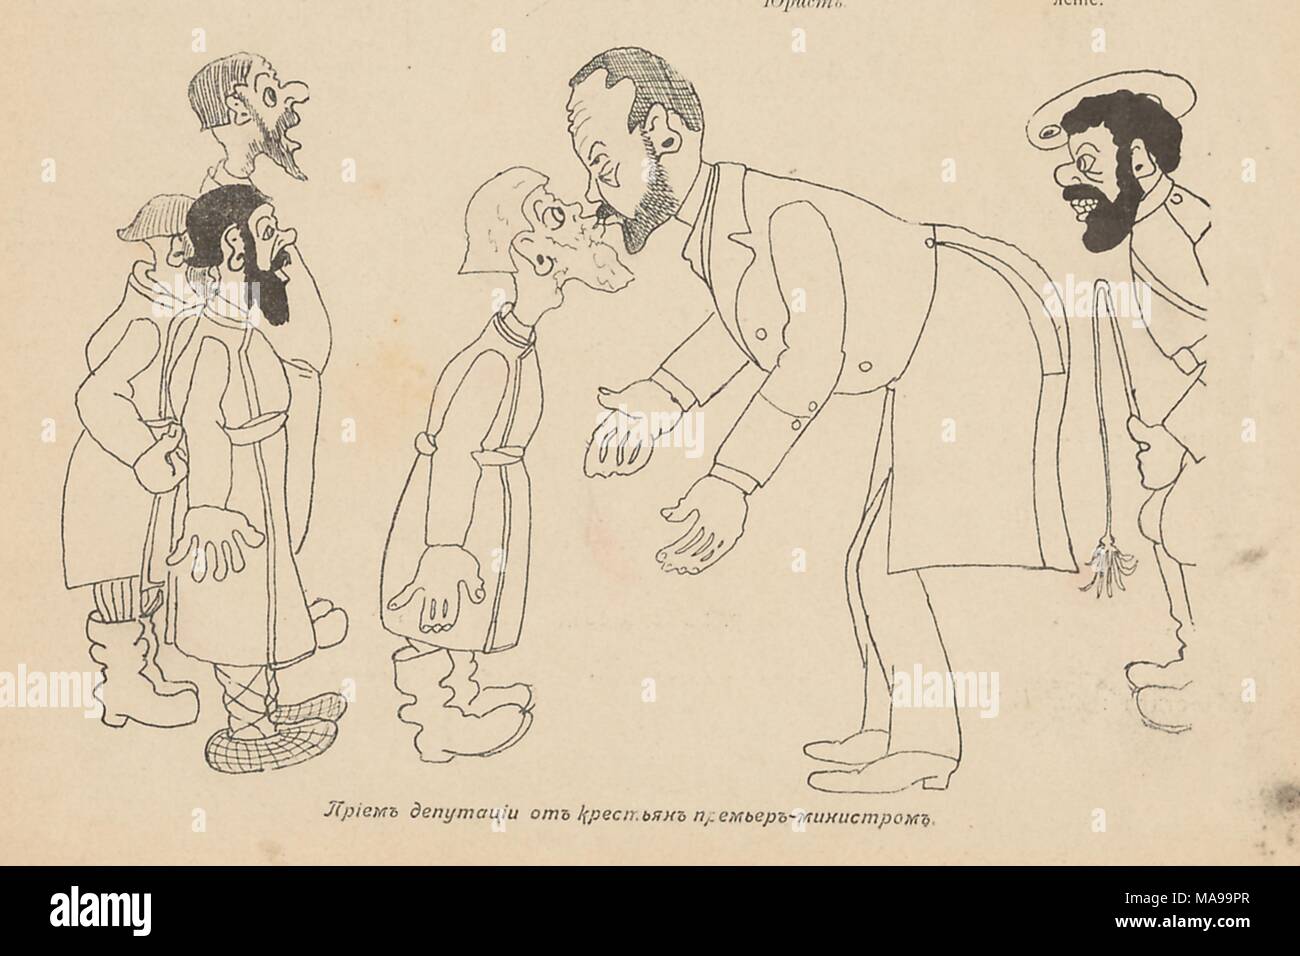 Cartoon from the Russian satirical journal Skorpion (Scorpion) depicting a farmer and Sergei Witte, the prime minister of the Russian empire in 1906, kissing while three other farmers and a soldier stand around them; The text below reads, 'reception of the delegation of farmers by the prime minister', 1906. () Stock Photo